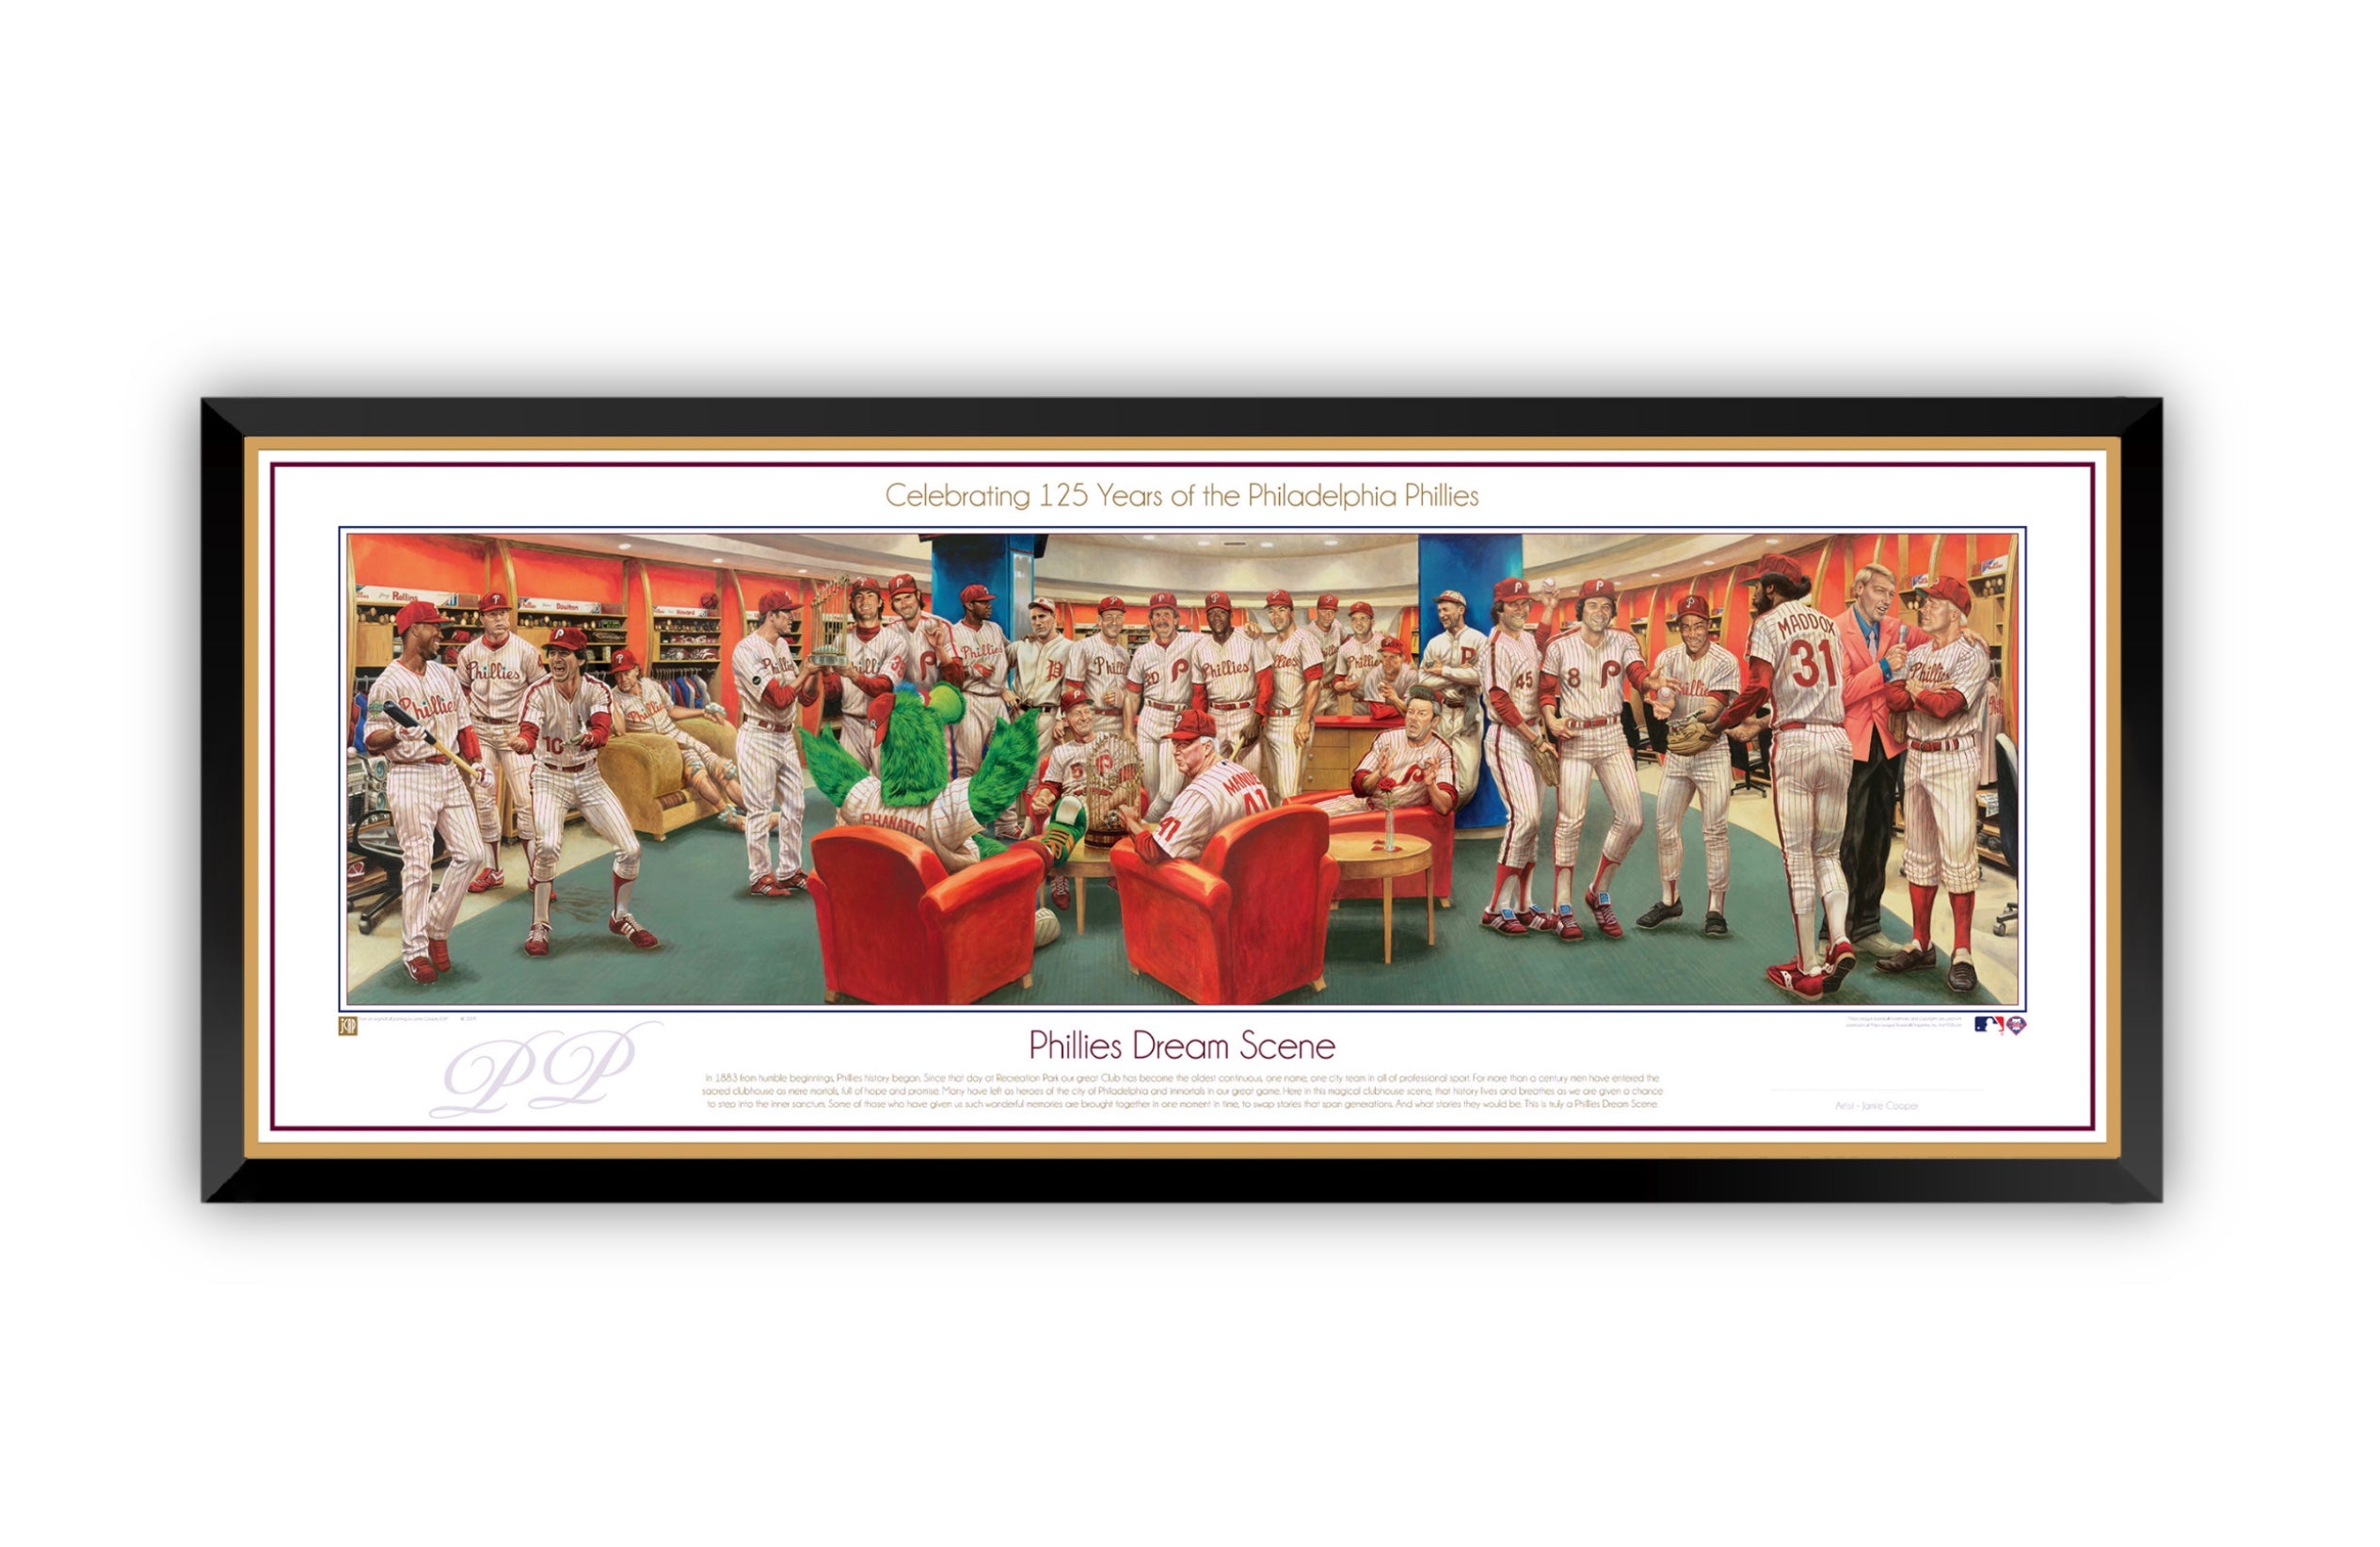  The Greatest-Scapes Personalized Framed Evolution History  Philadelphia Phillies Uniforms Print with Your Photo